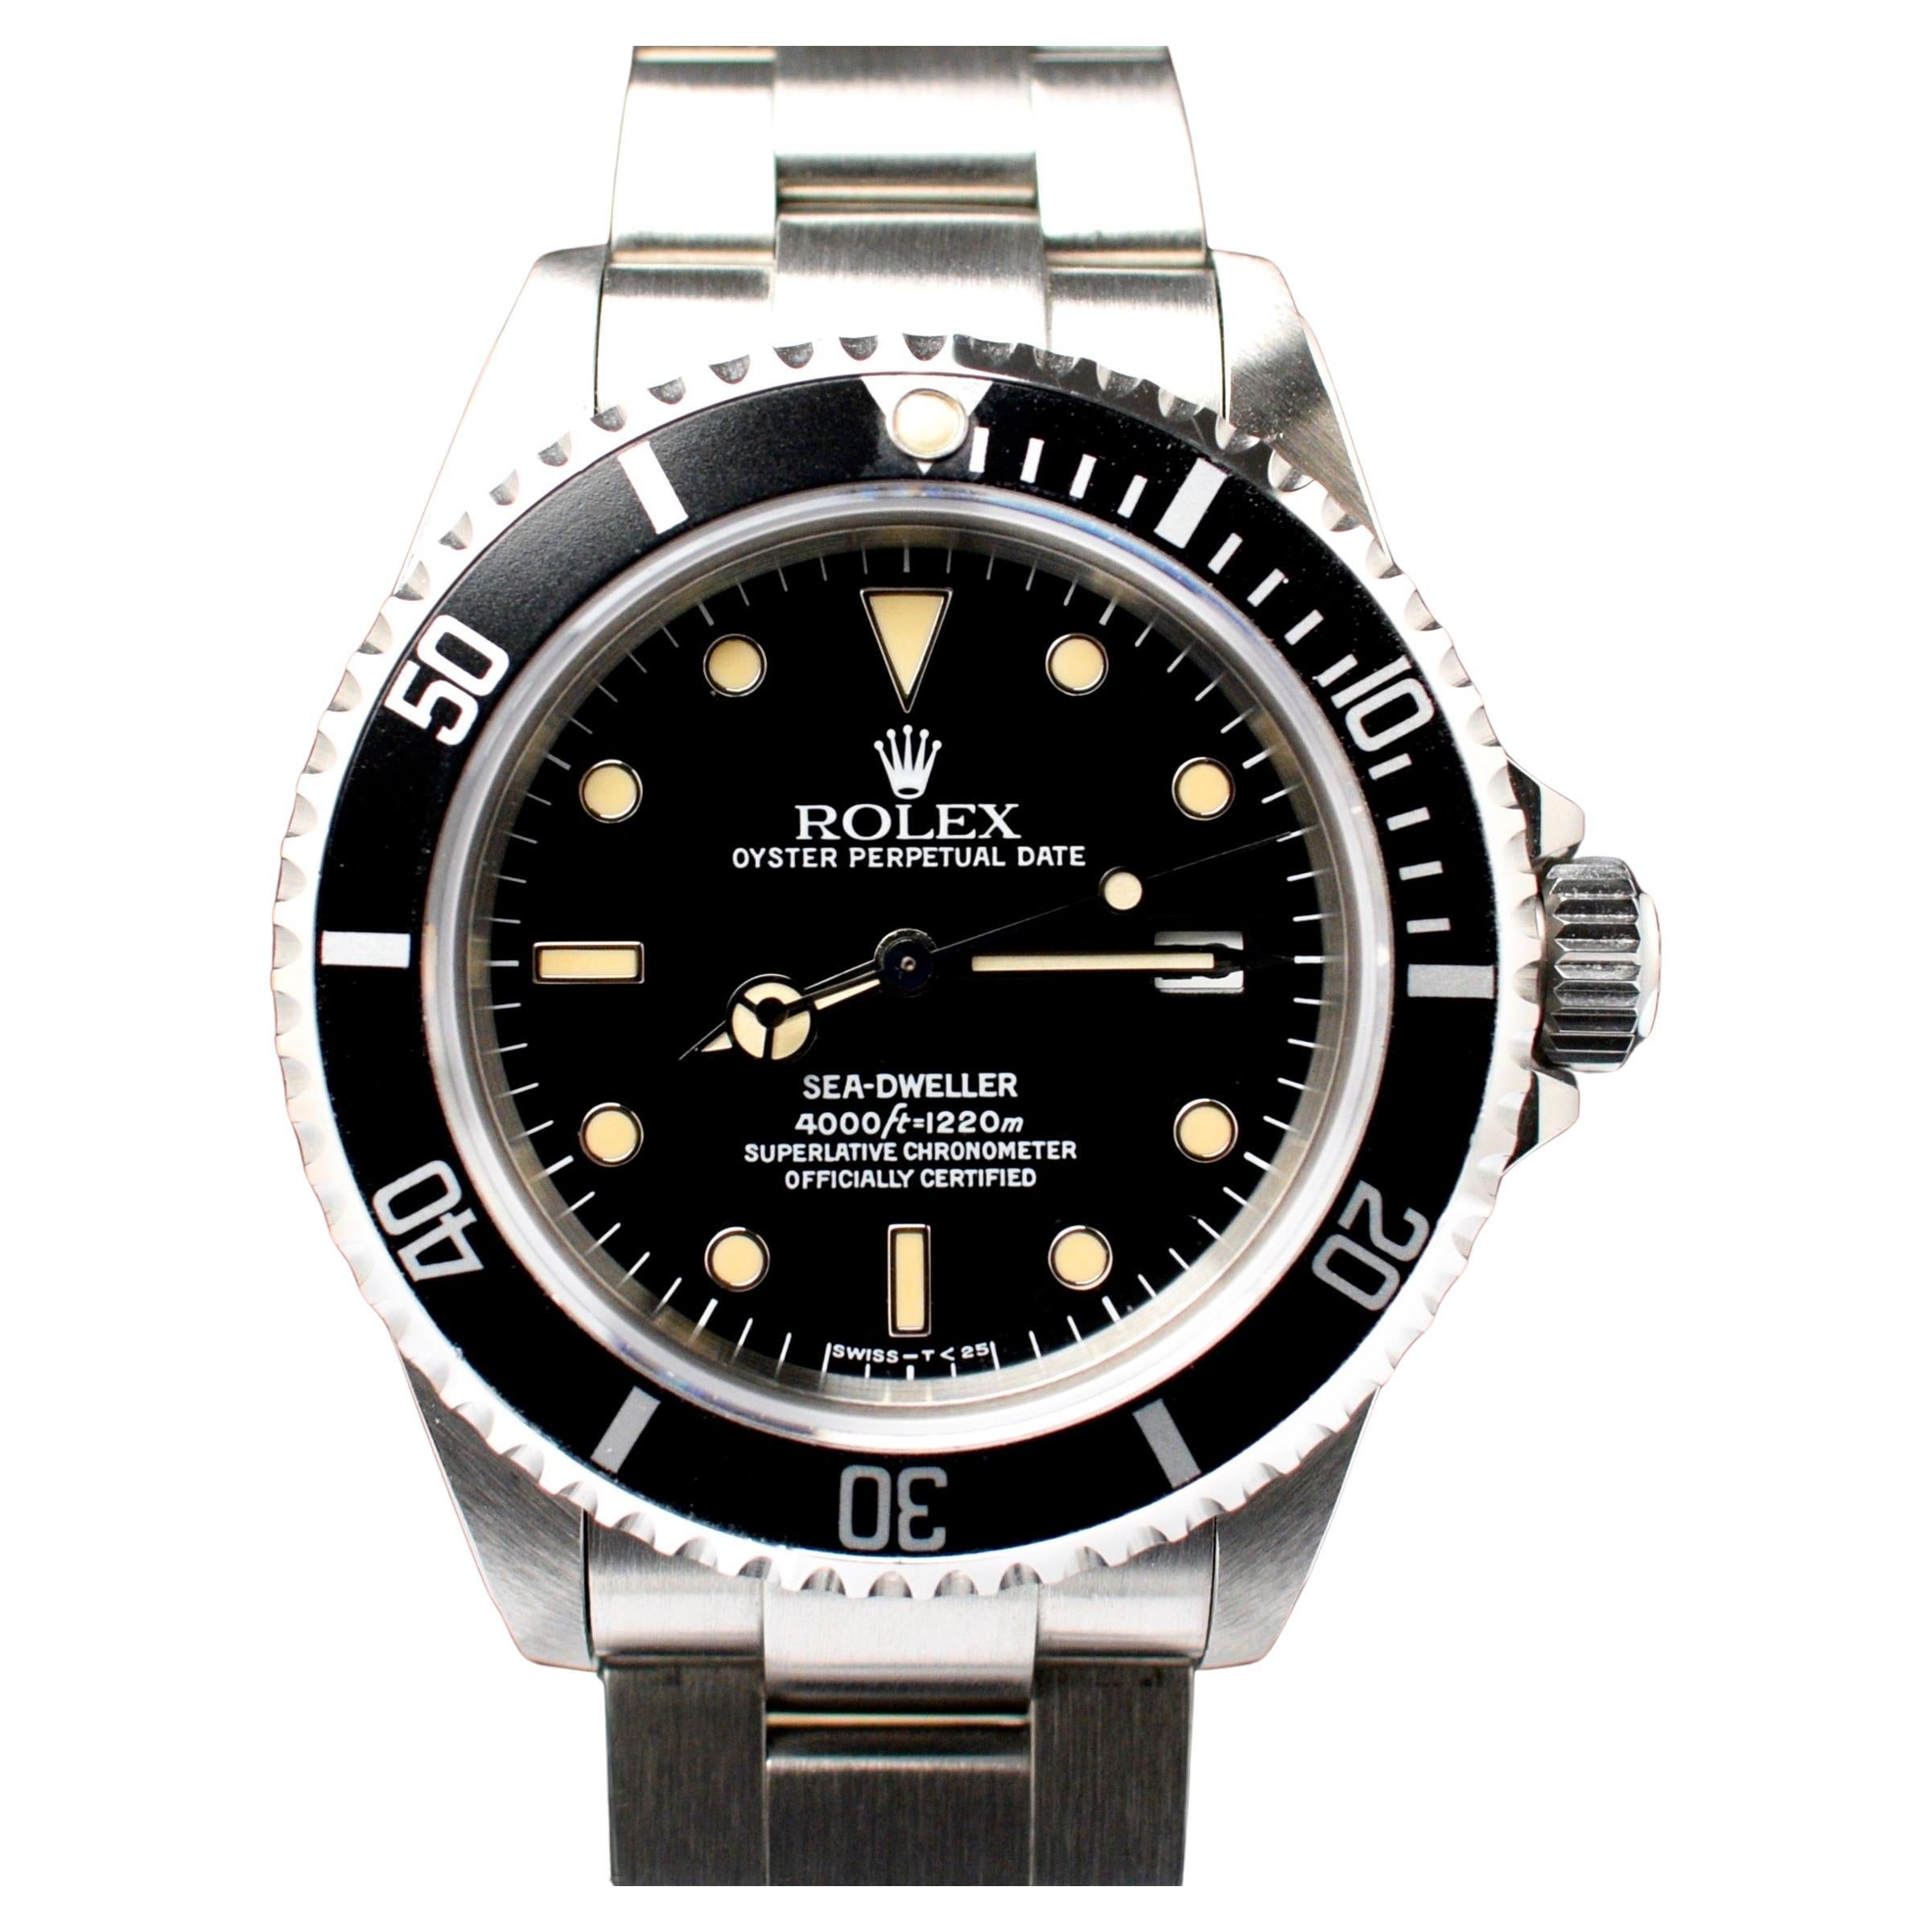 How thick is the Rolex Sea-Dweller Deepsea?